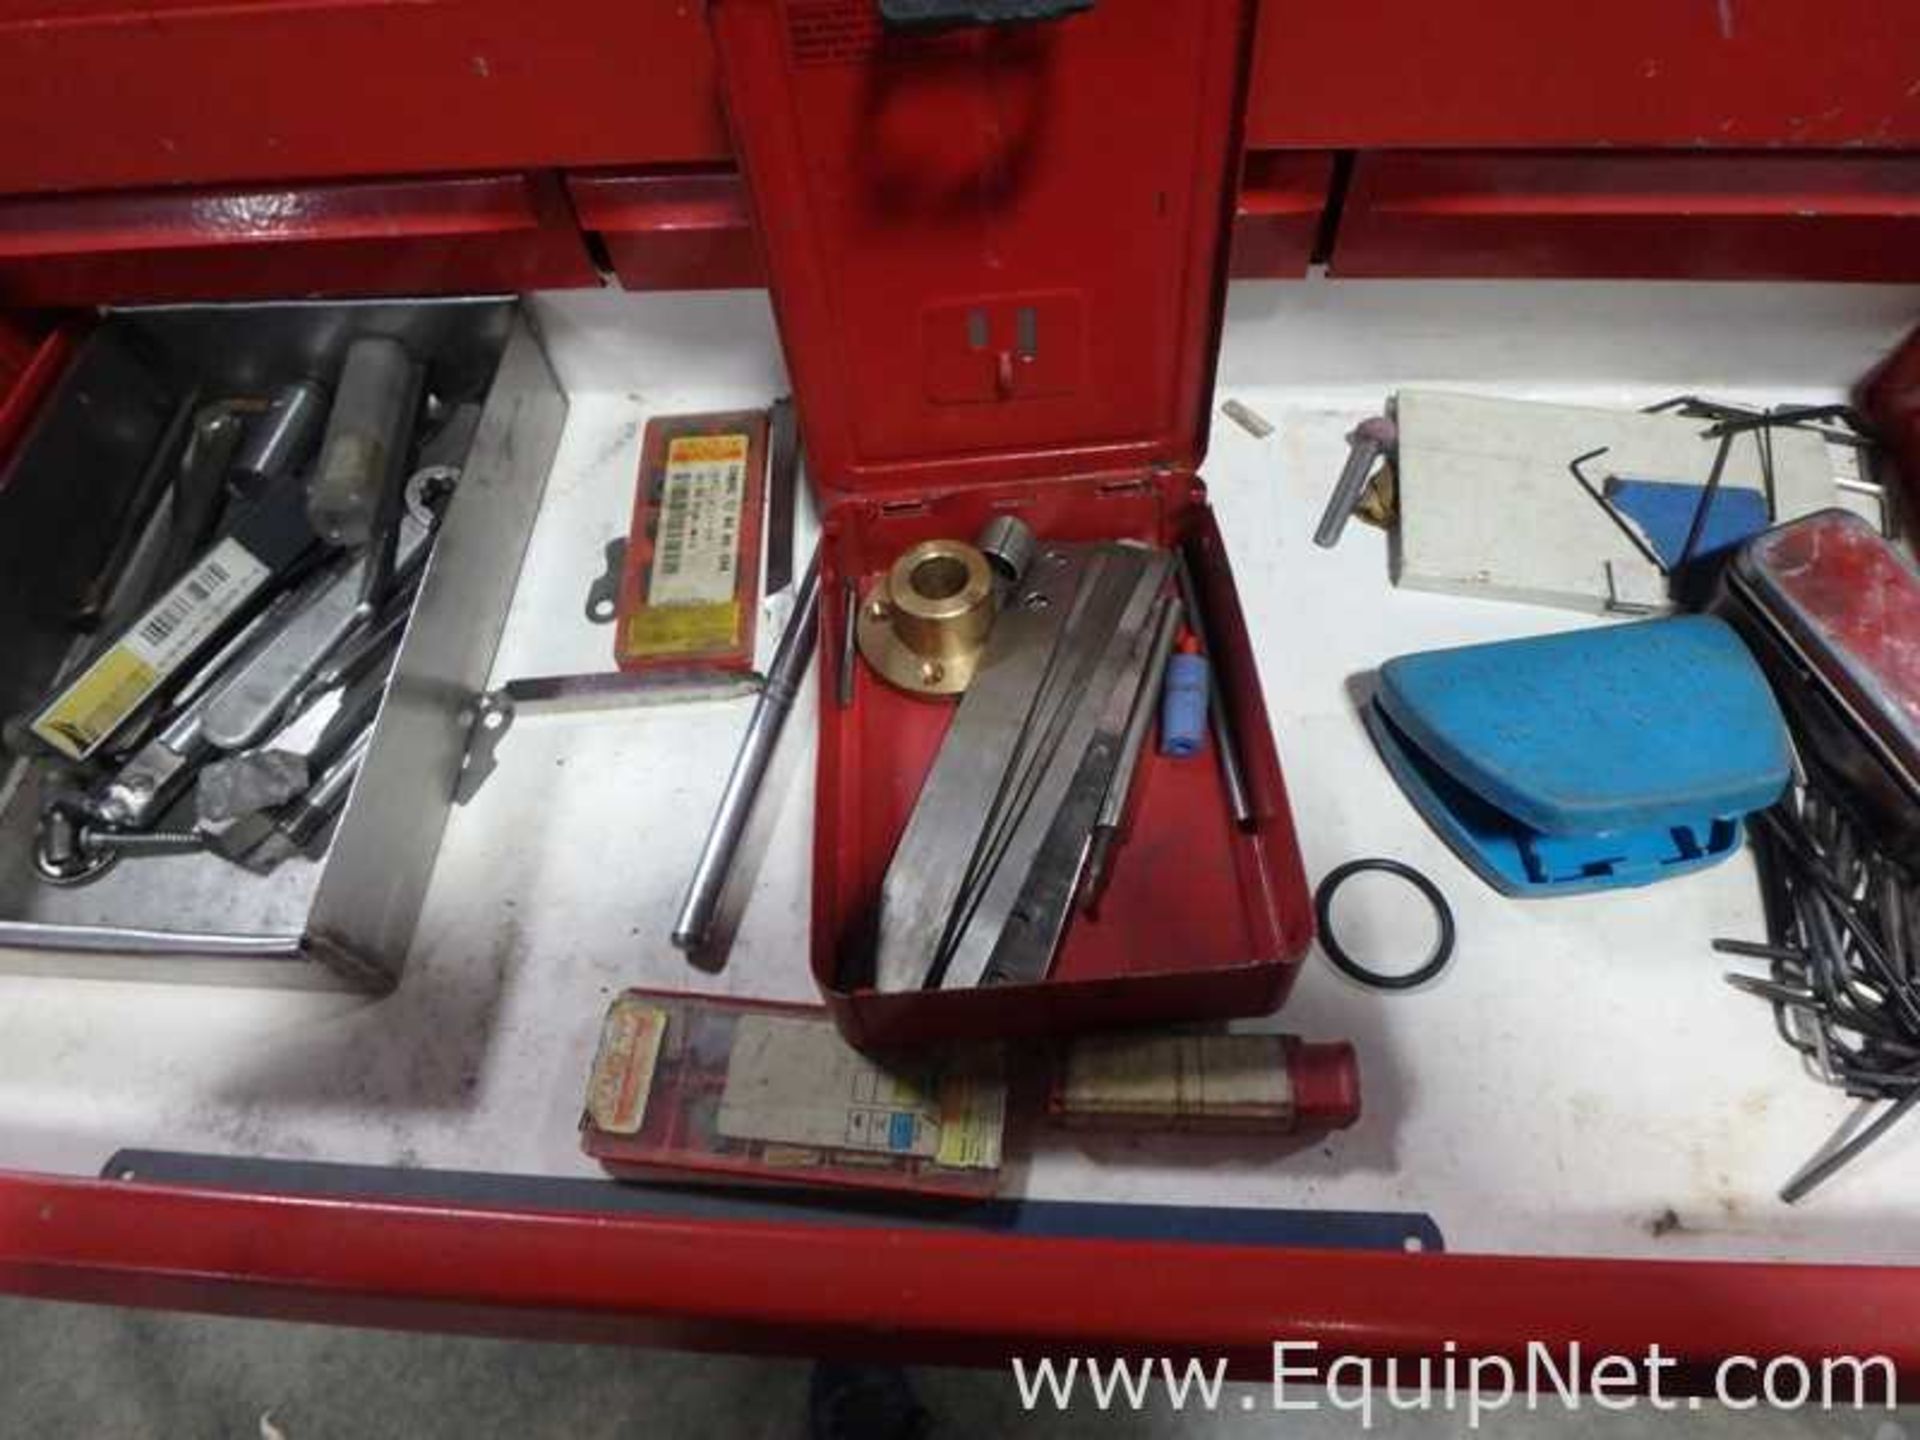 EQUIPNET LISTING #835371; REMOVAL COST: $15; DESCRIPTION: Tool Chest with Some ToolsSee Photos - Image 4 of 8